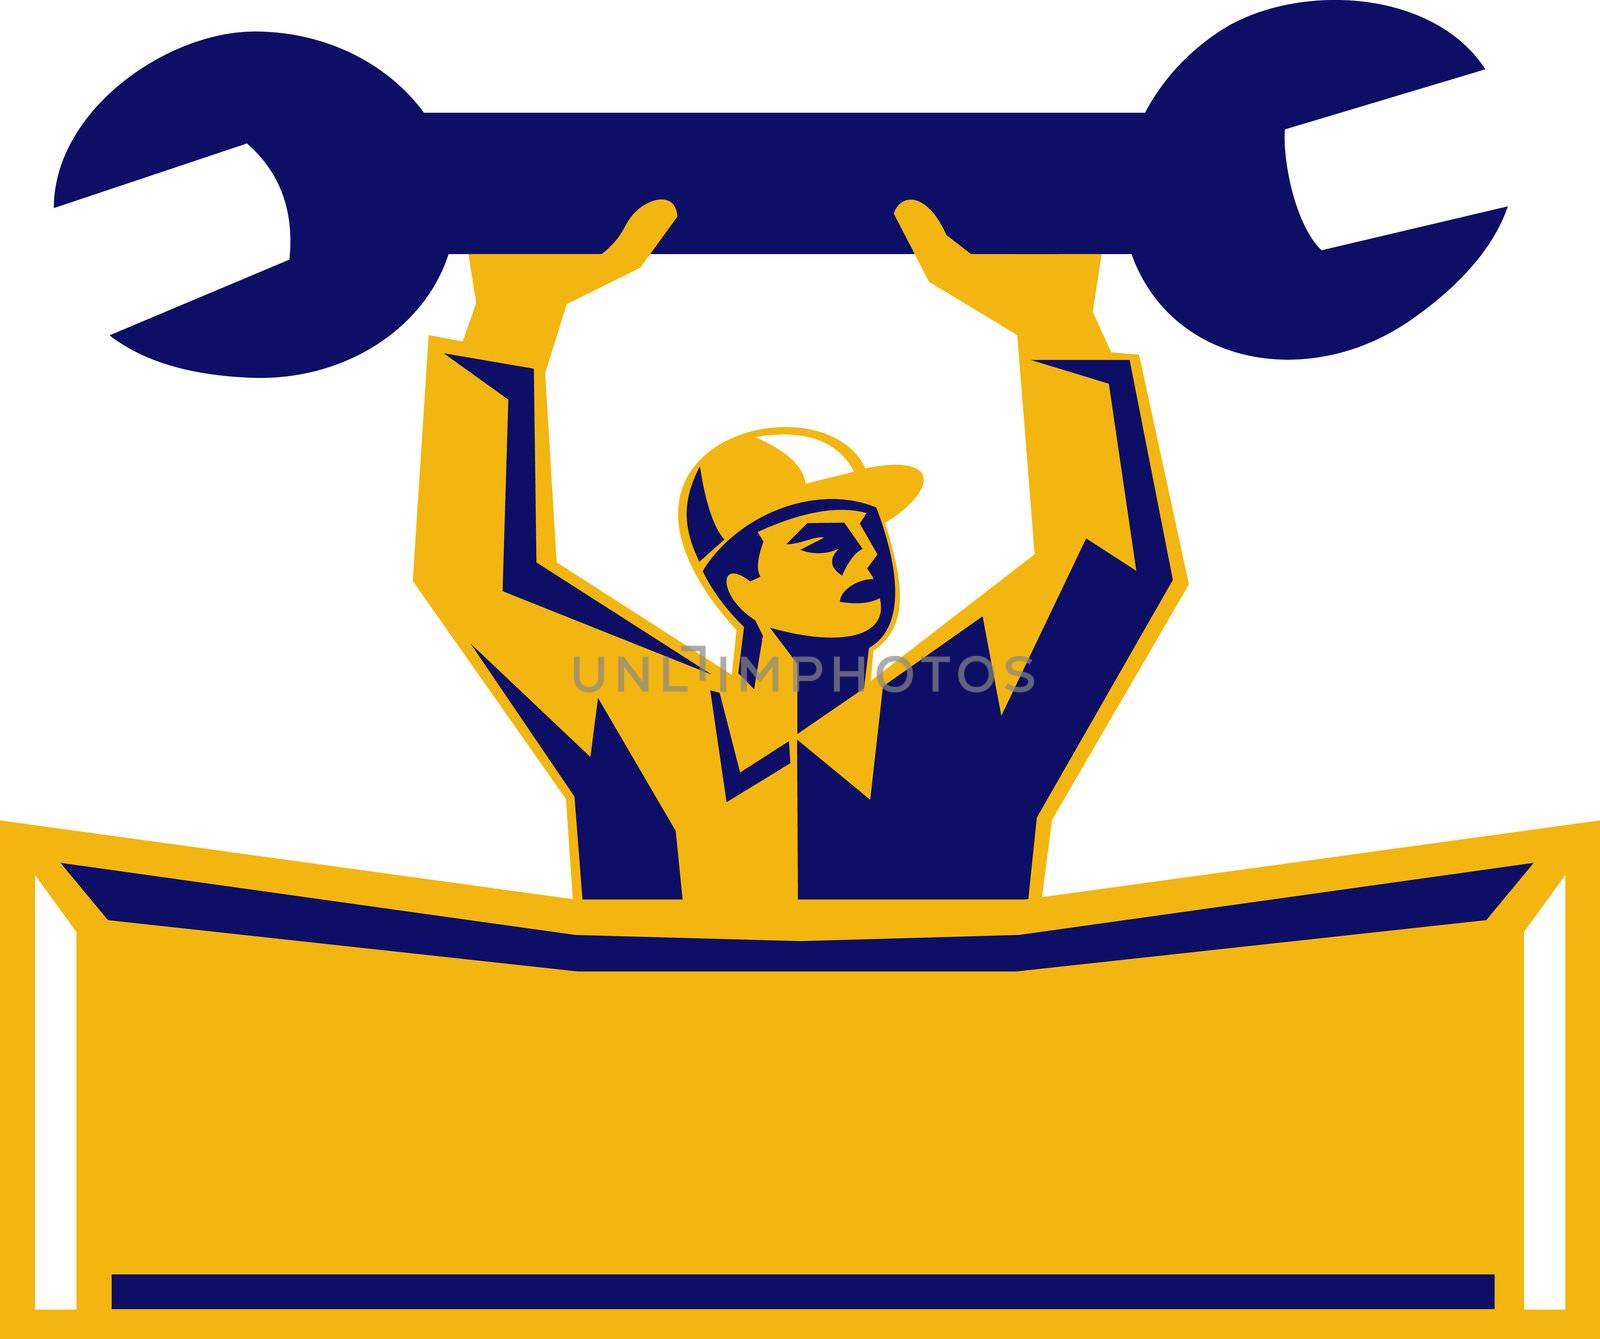 Imagery shows an automobile mechanic holding up a spanner. Done in two (2) colors.